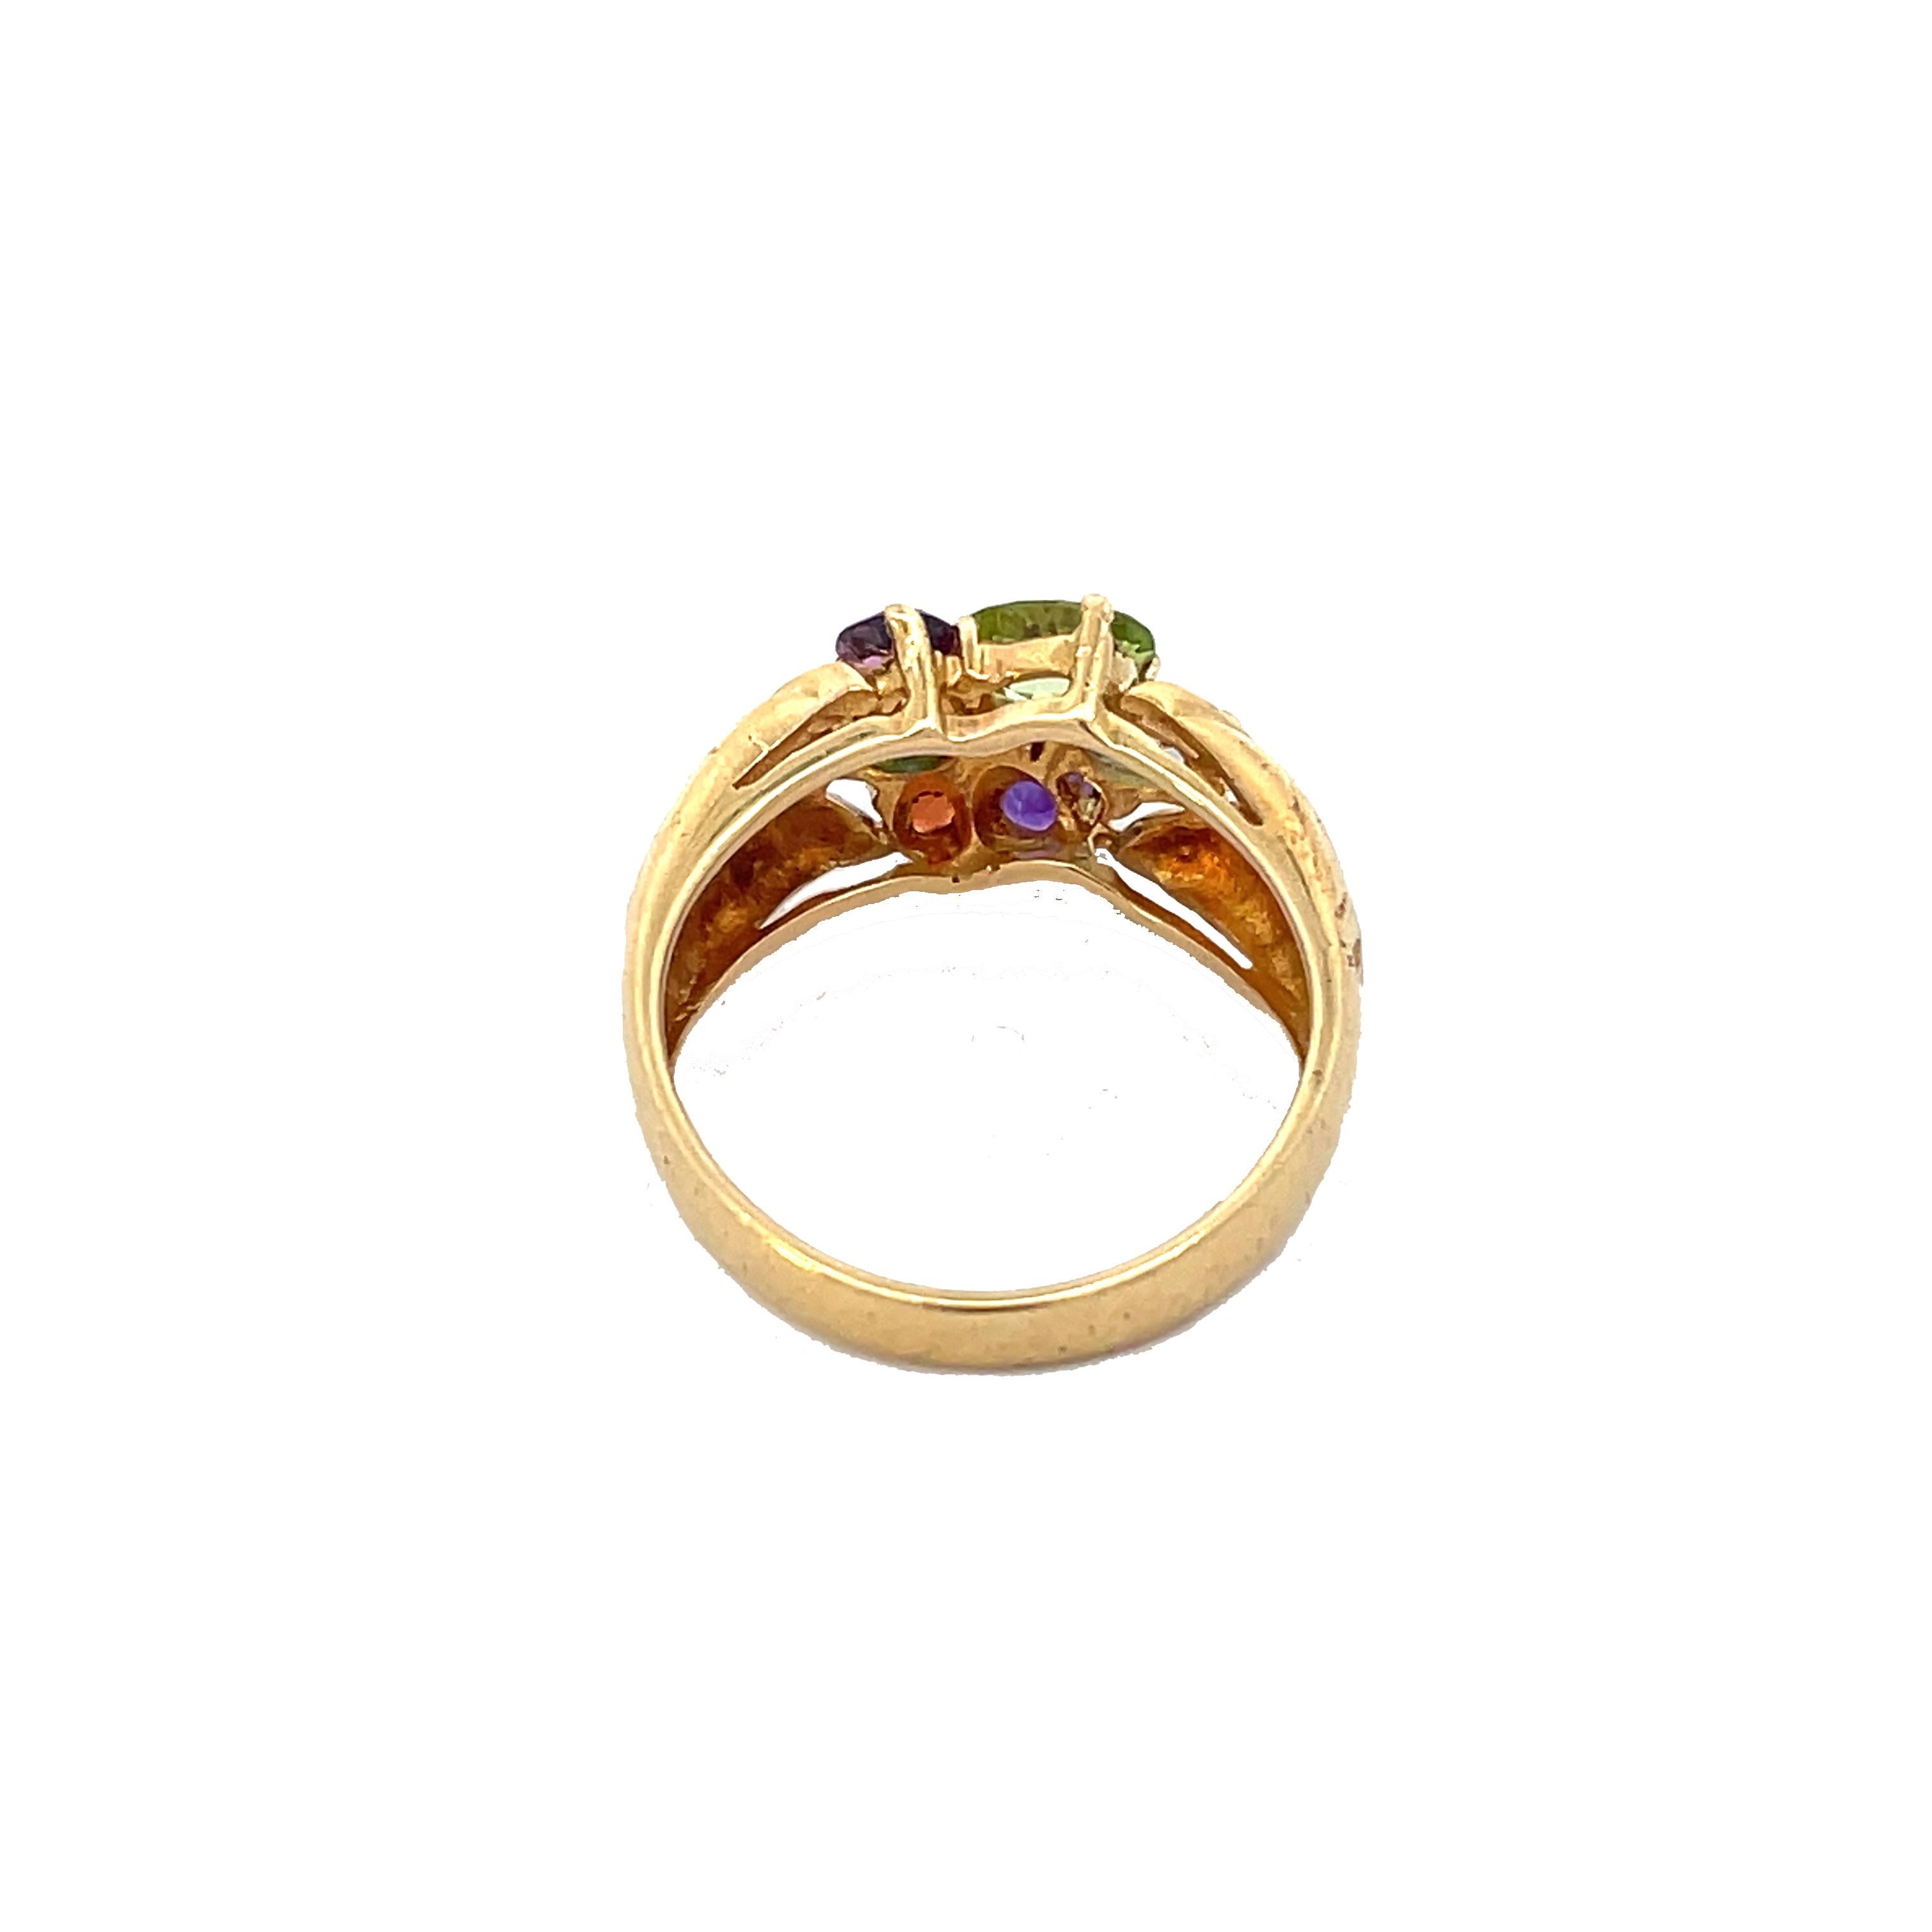 1960s 18K Yellow Gold H. Stern Multi-Stone Ring In Excellent Condition For Sale In Lexington, KY